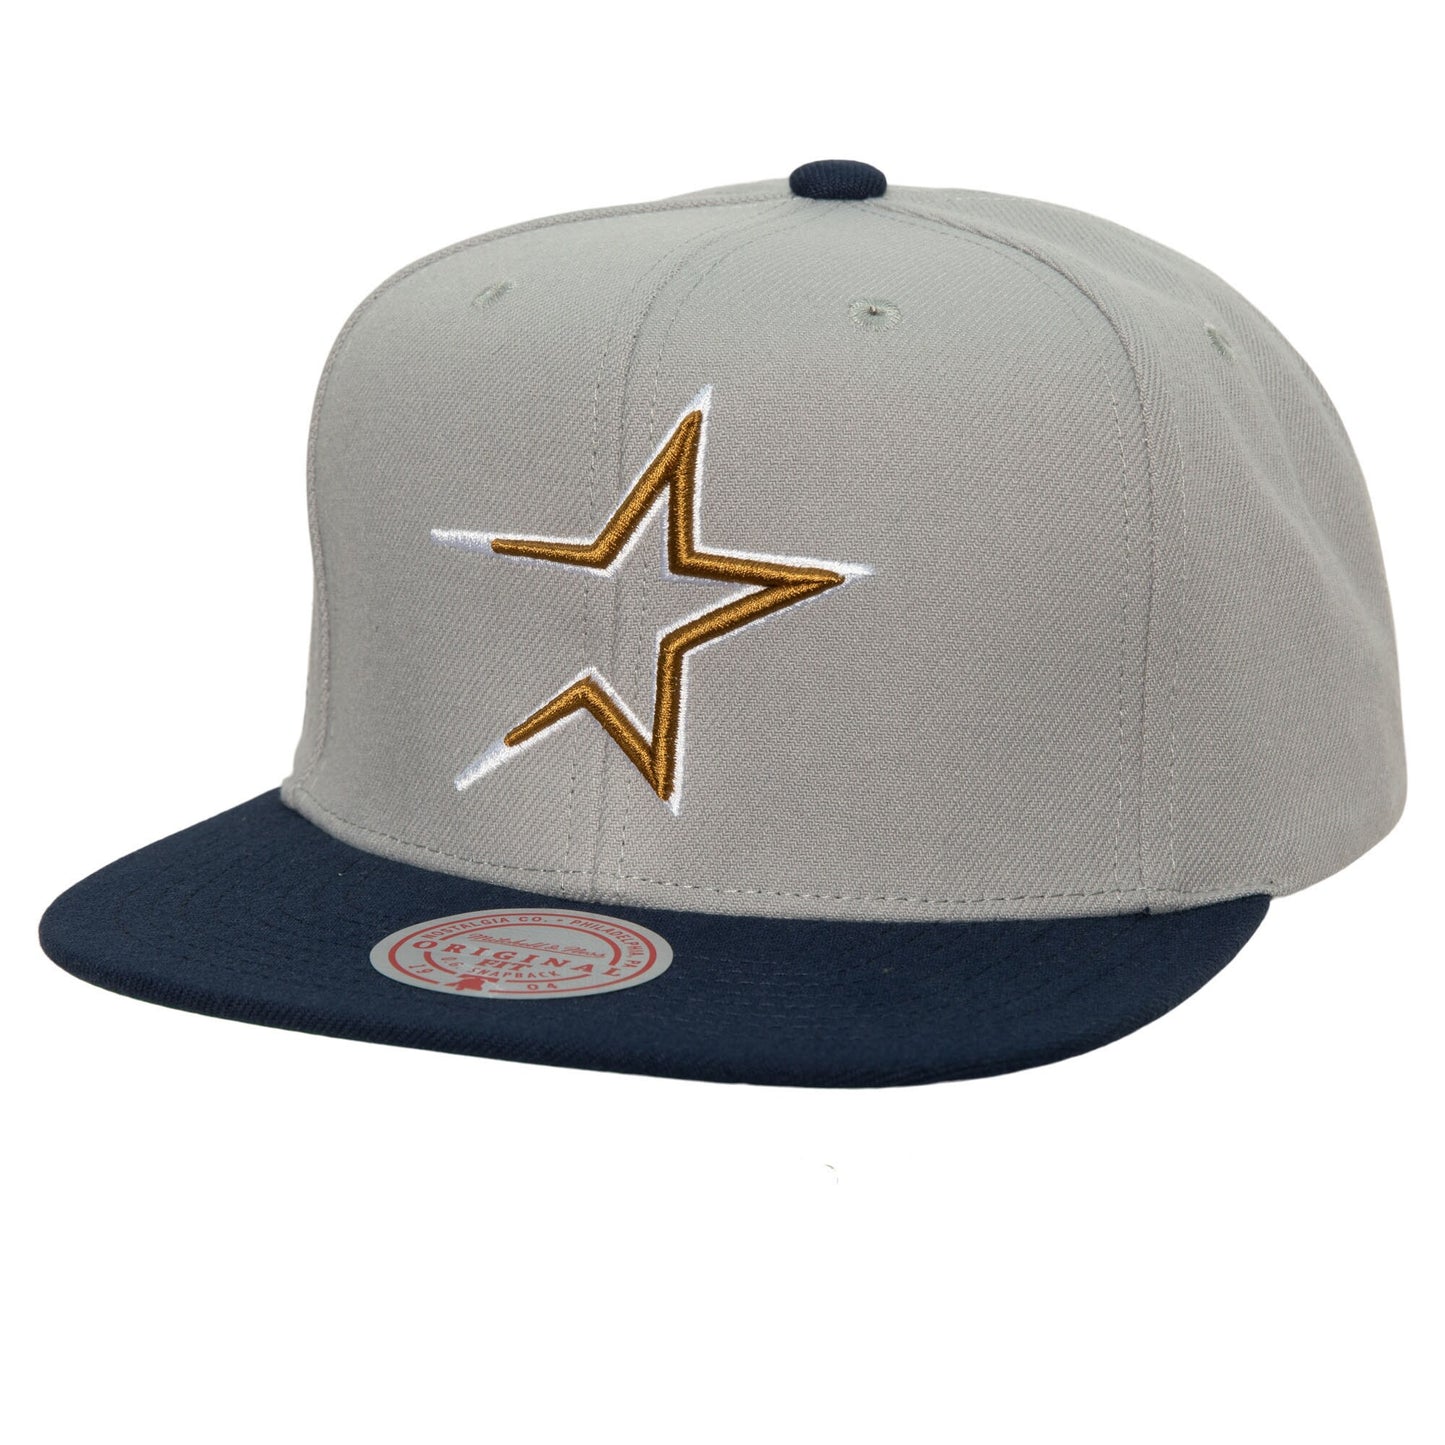 Houston Astros Mitchell & Ness Cooperstown Collection Away Snapback Hat - Gray